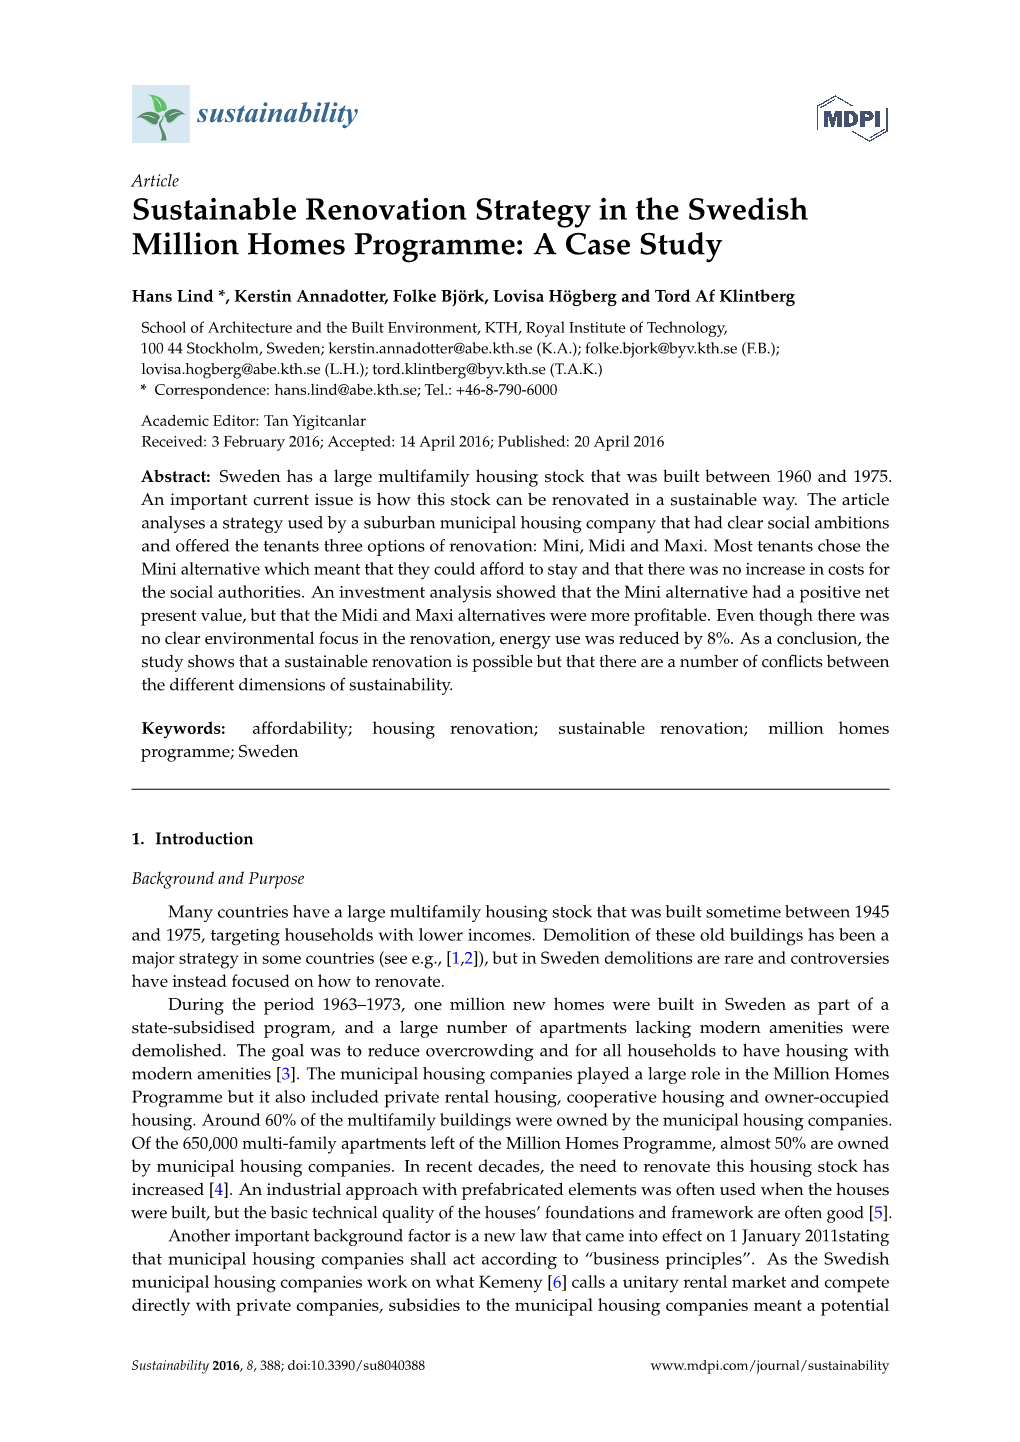 Sustainable Renovation Strategy in the Swedish Million Homes Programme: a Case Study